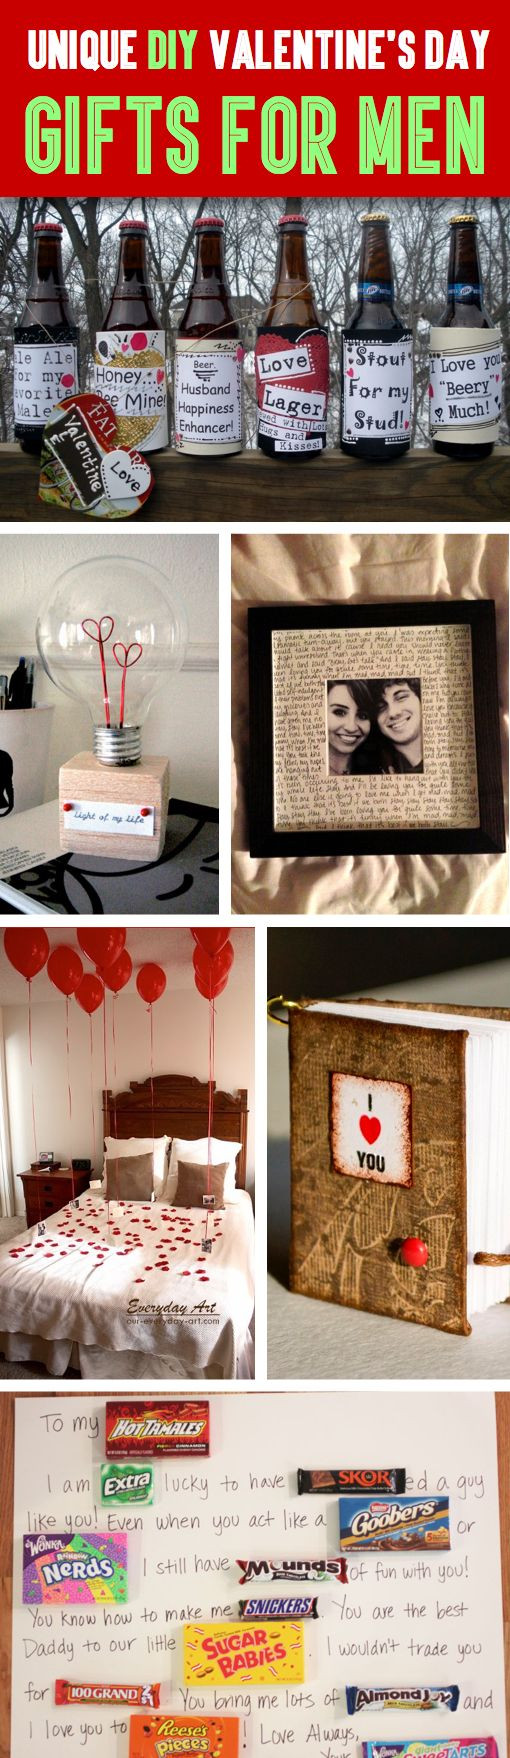 Gifts For Men For Valentines Day
 35 Unique DIY Valentine s Day Gifts For Men